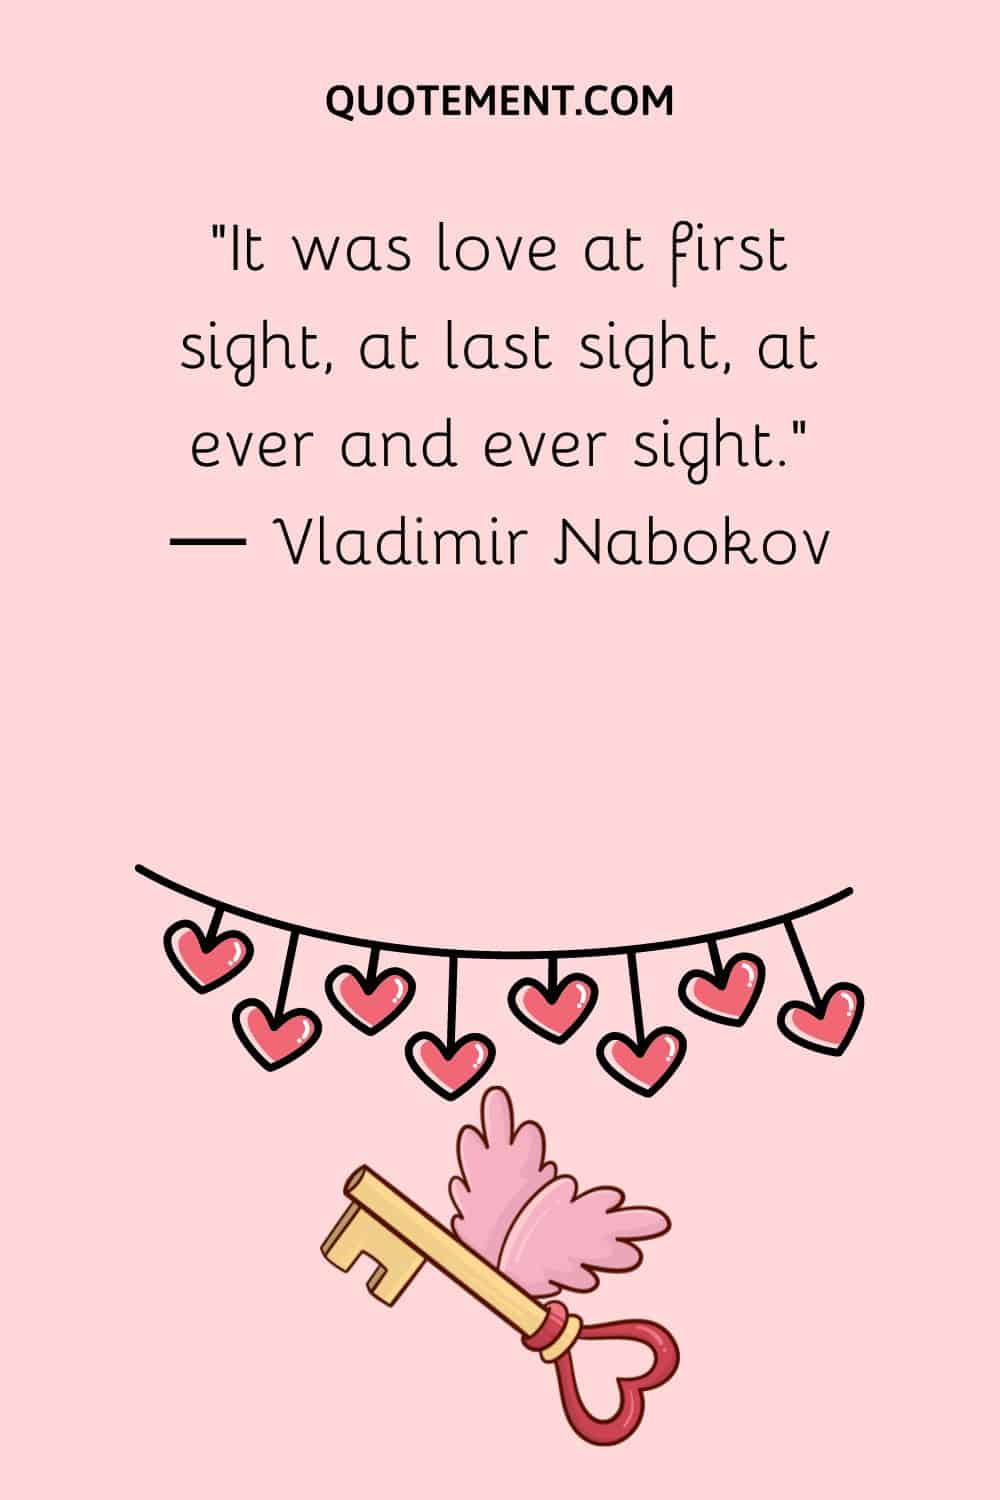 “It was love at first sight, at last sight, at ever and ever sight.” ― Vladimir Nabokov